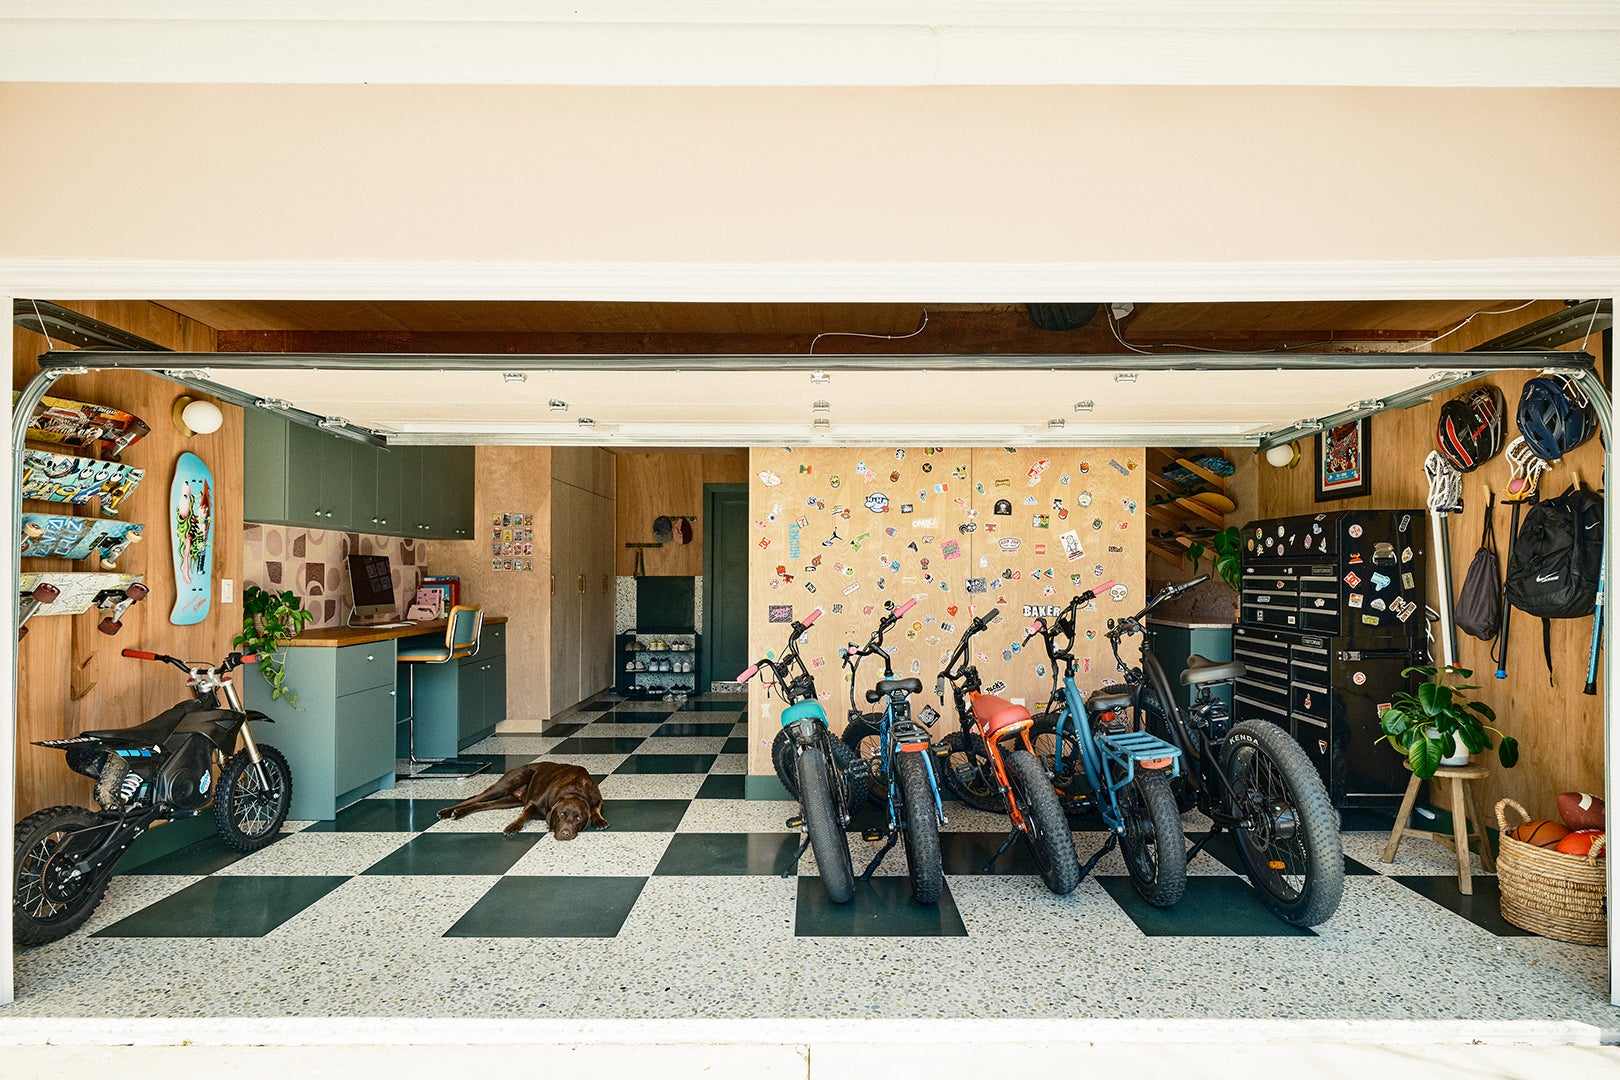 Motorbikes lined up on terrazzo floors in a garage